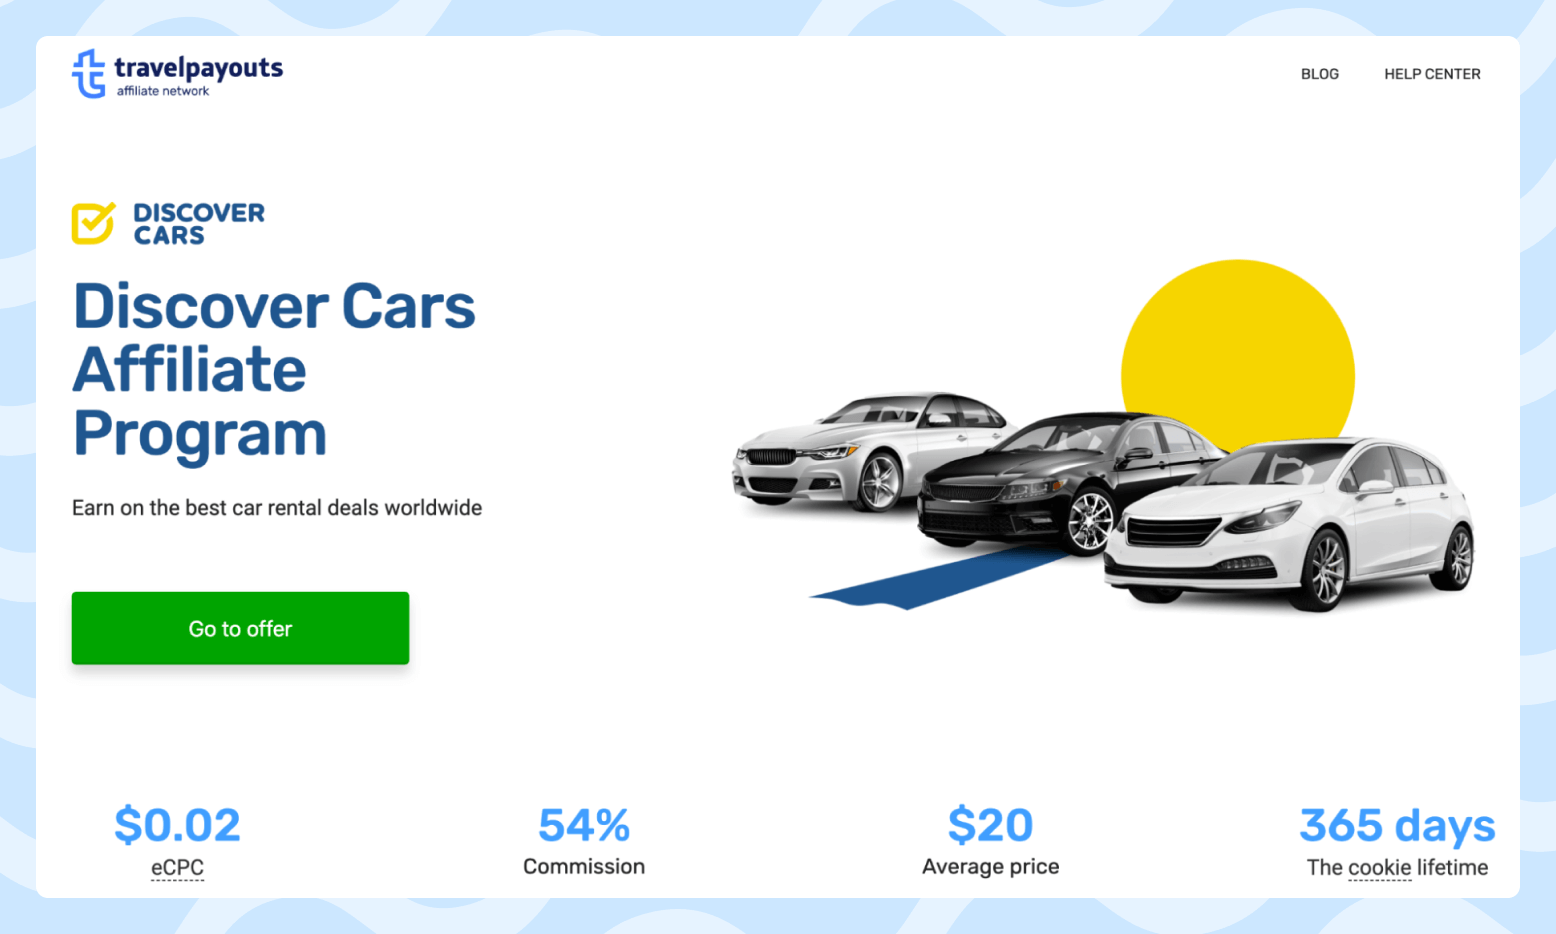 Screenshot of the Discover Cars affiliate program page featuring three rental cars in a parking lot. 